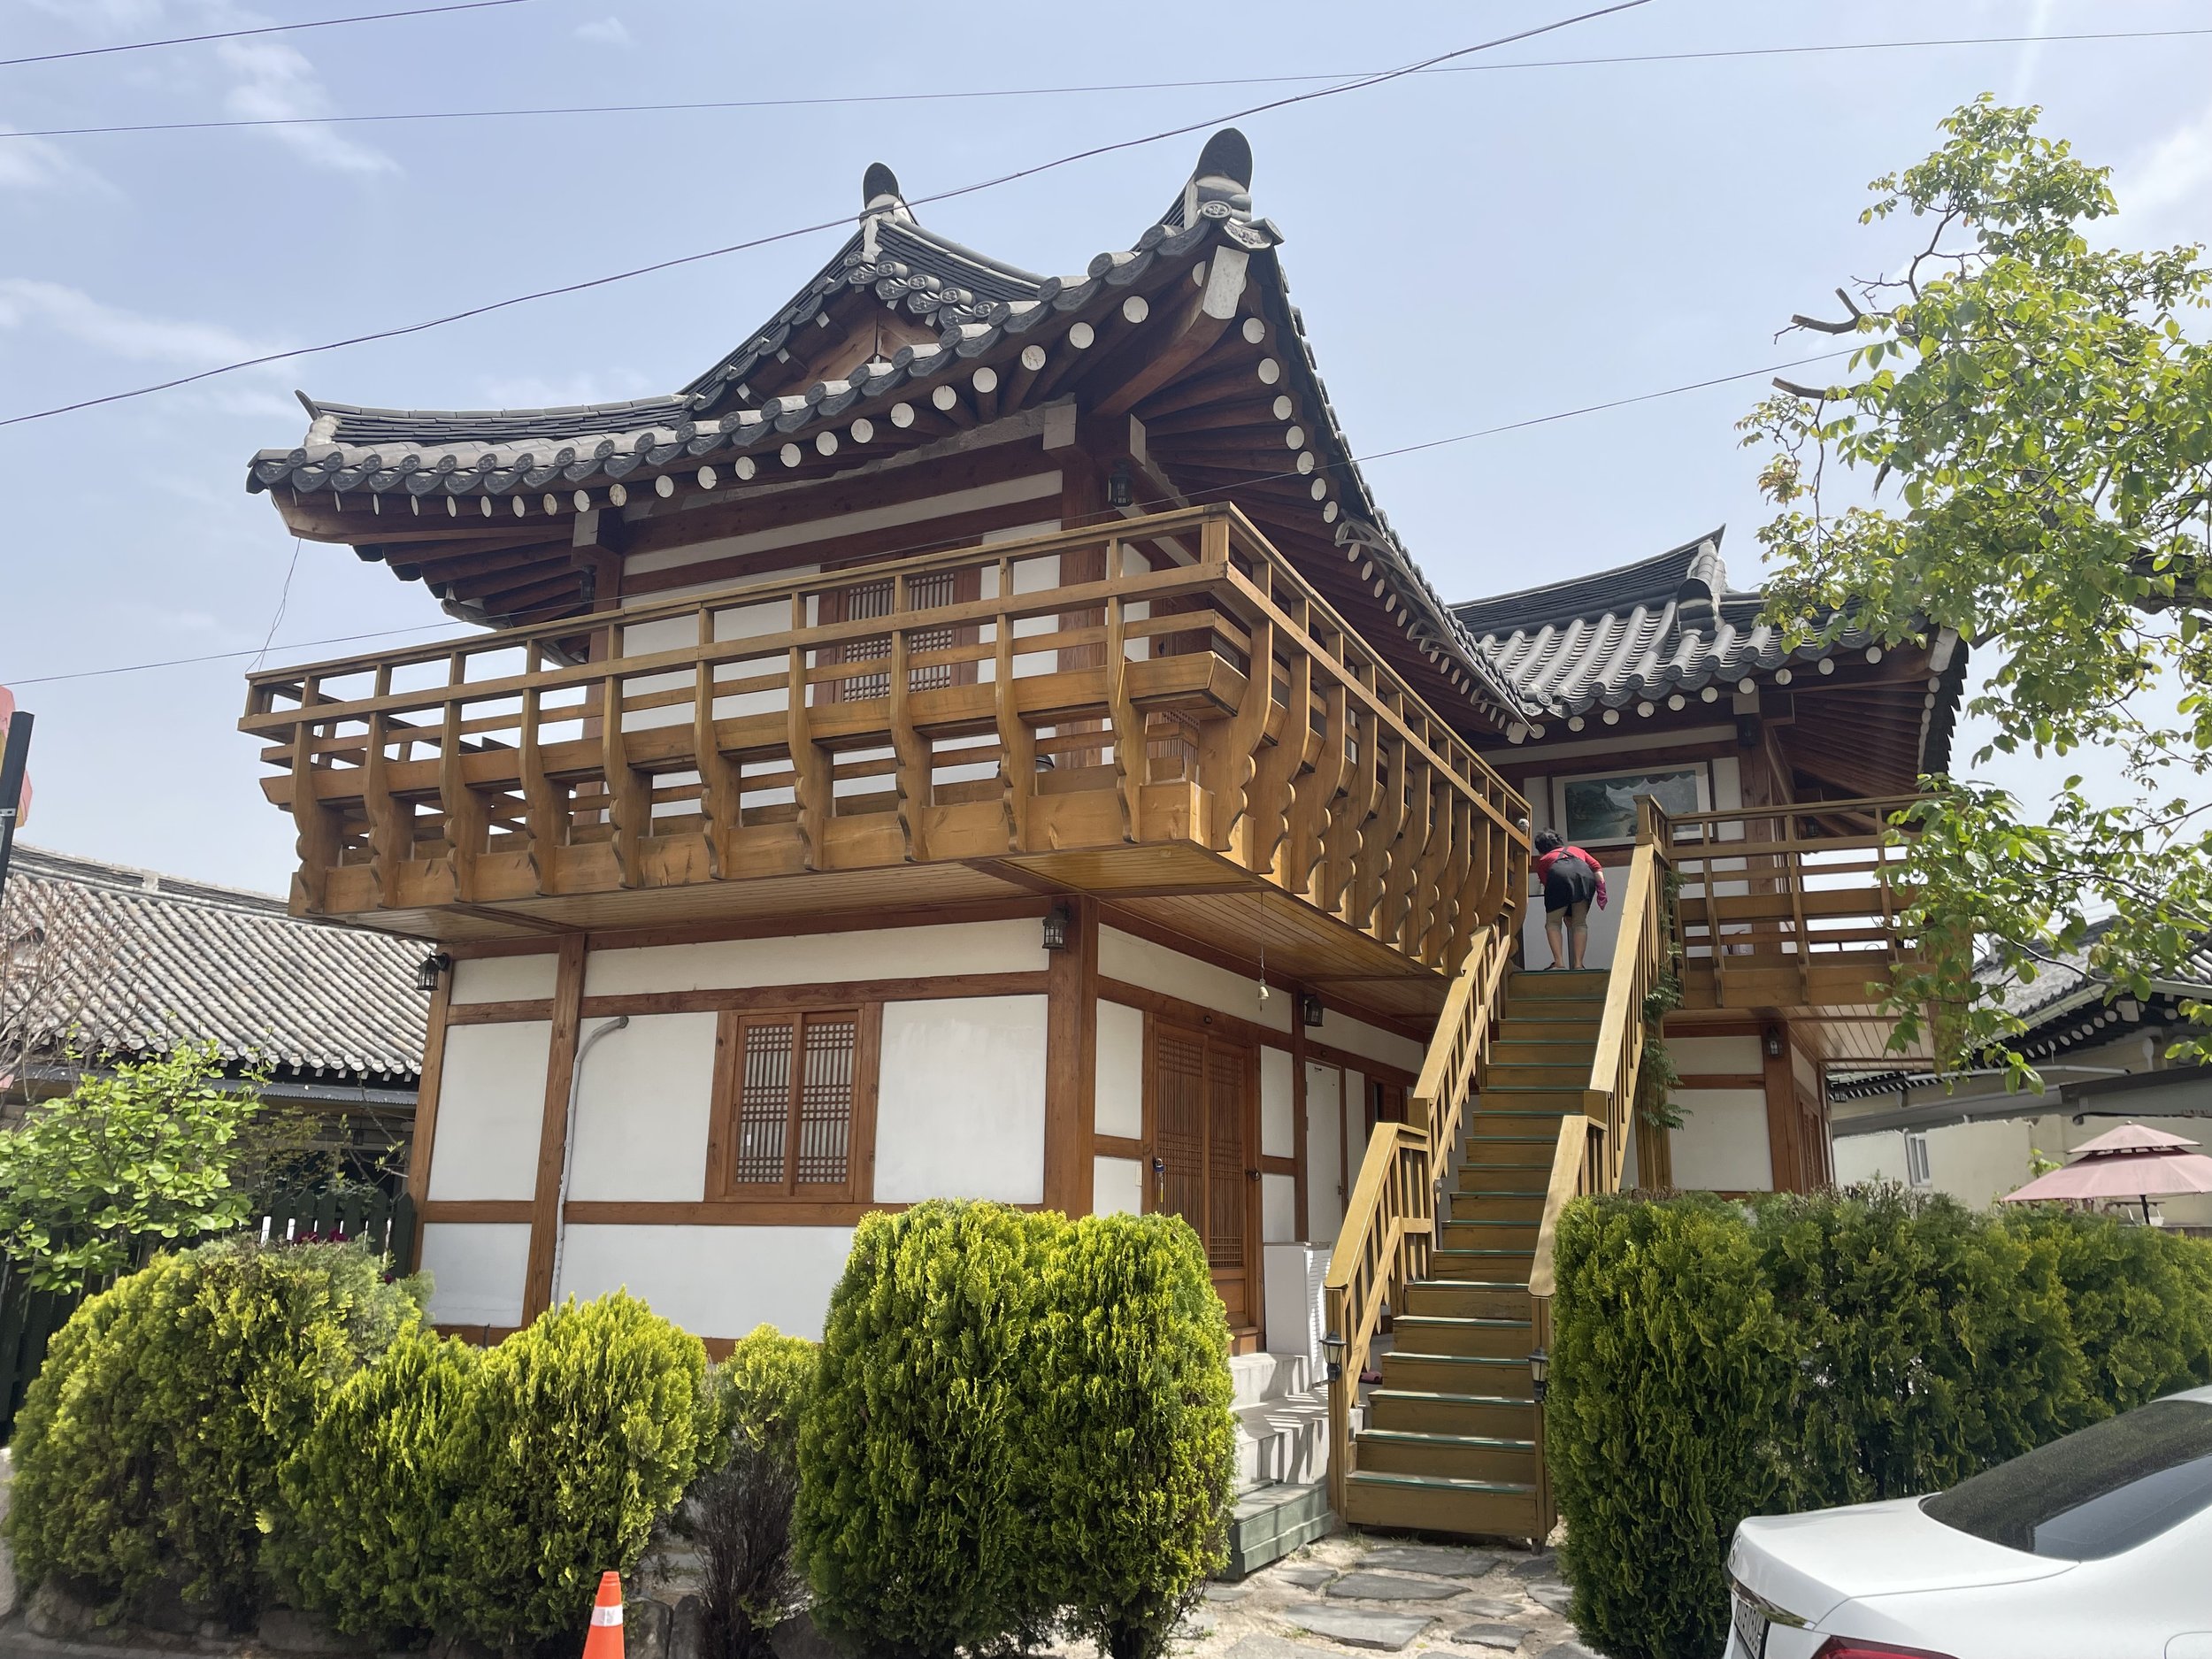 Our Hanok house for the night